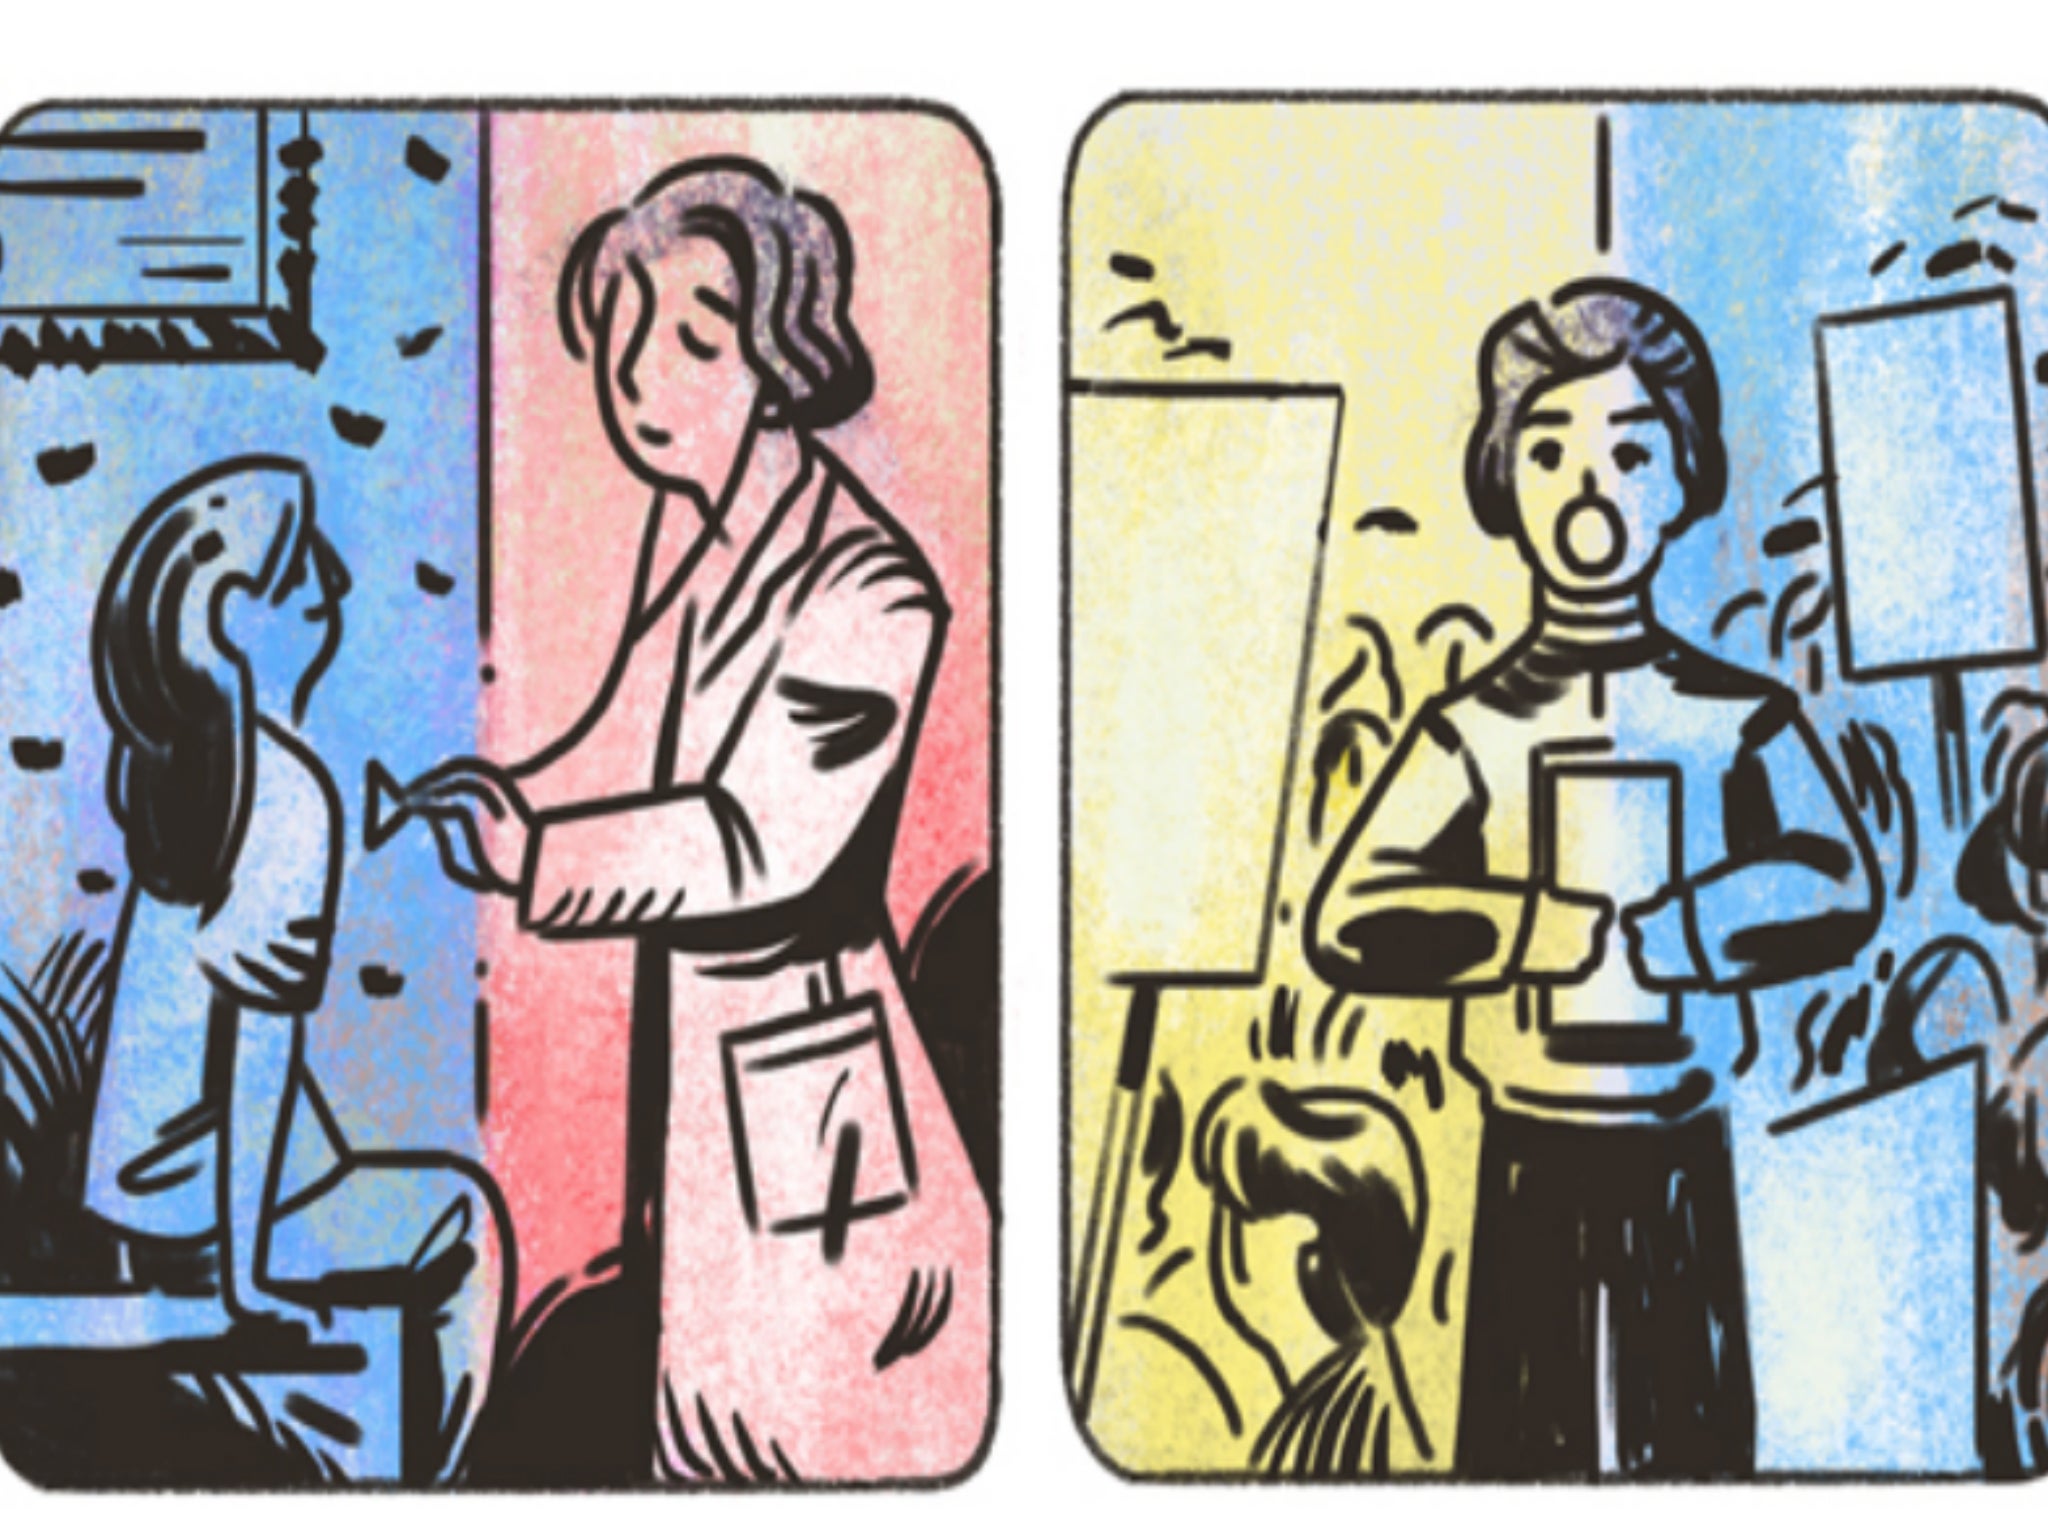 This week's Google Doodle honours physician and women's health advocate Helen Rodriguez-Trias on what would have been her 89th birthday